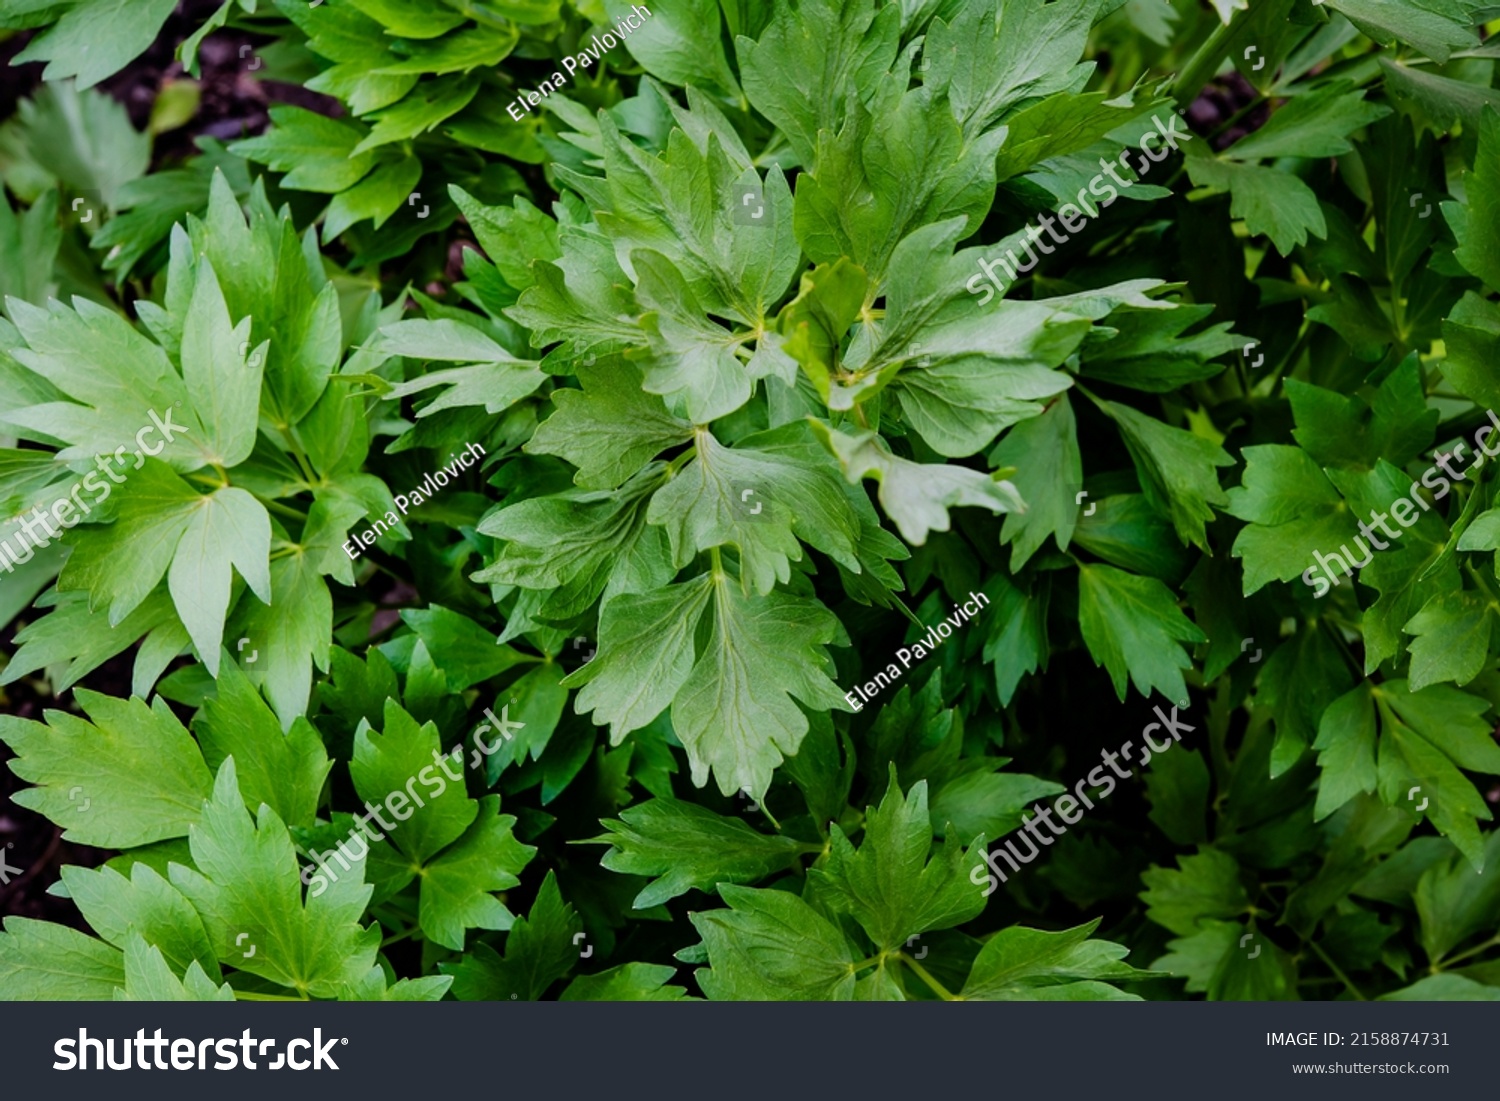 Levisticum officinale or lovage in the garden,  fresh green leaves #2158874731